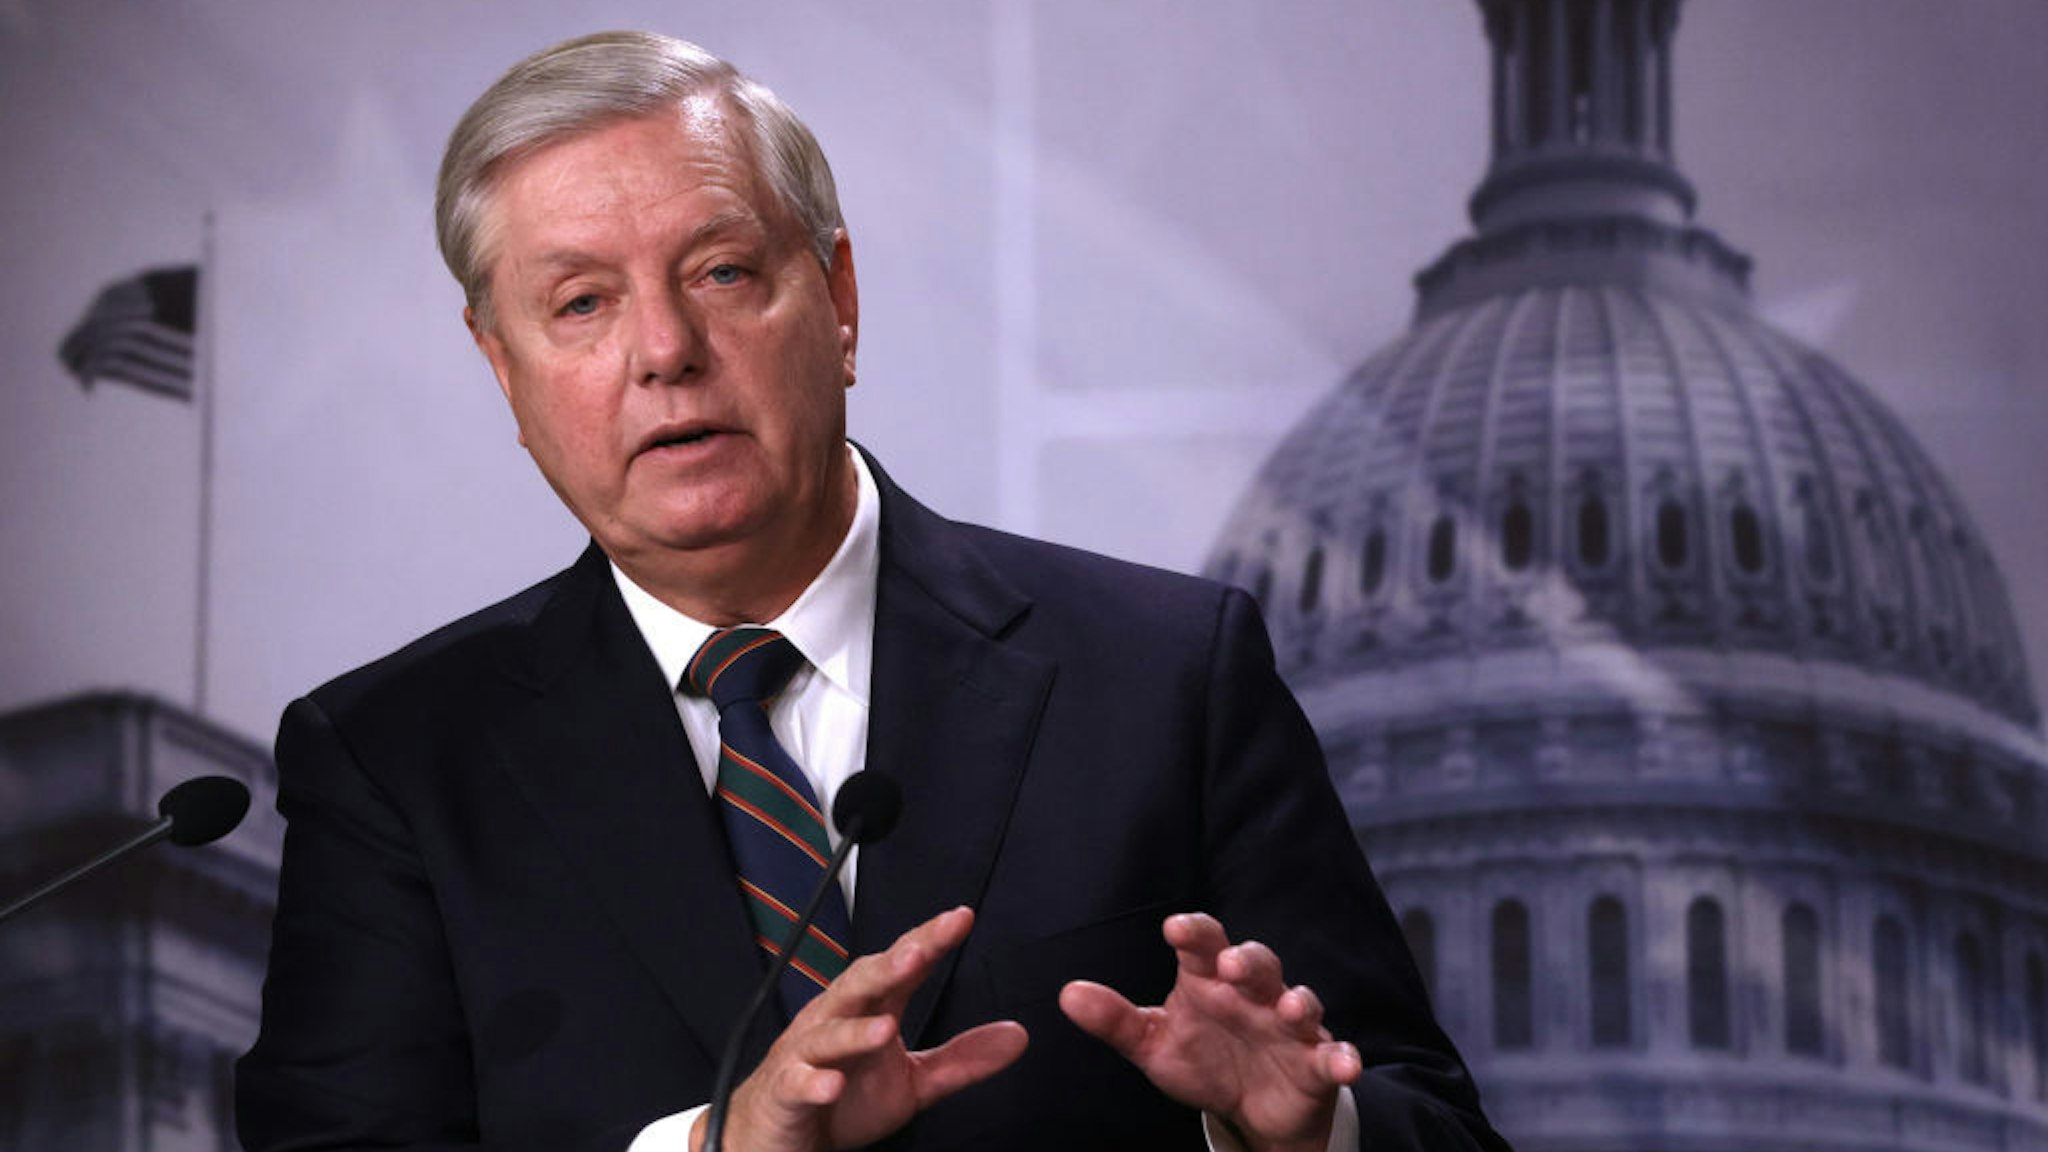 U.S. Sen. Lindsey Graham (R-SC) speaks during a news conference at the U.S. Capitol January 7, 2021 in Washington, DC. Sen. Graham condemned the pro-Trump mob’s action of storming the Capitol the day before. (Photo by Alex Wong/Getty Images)